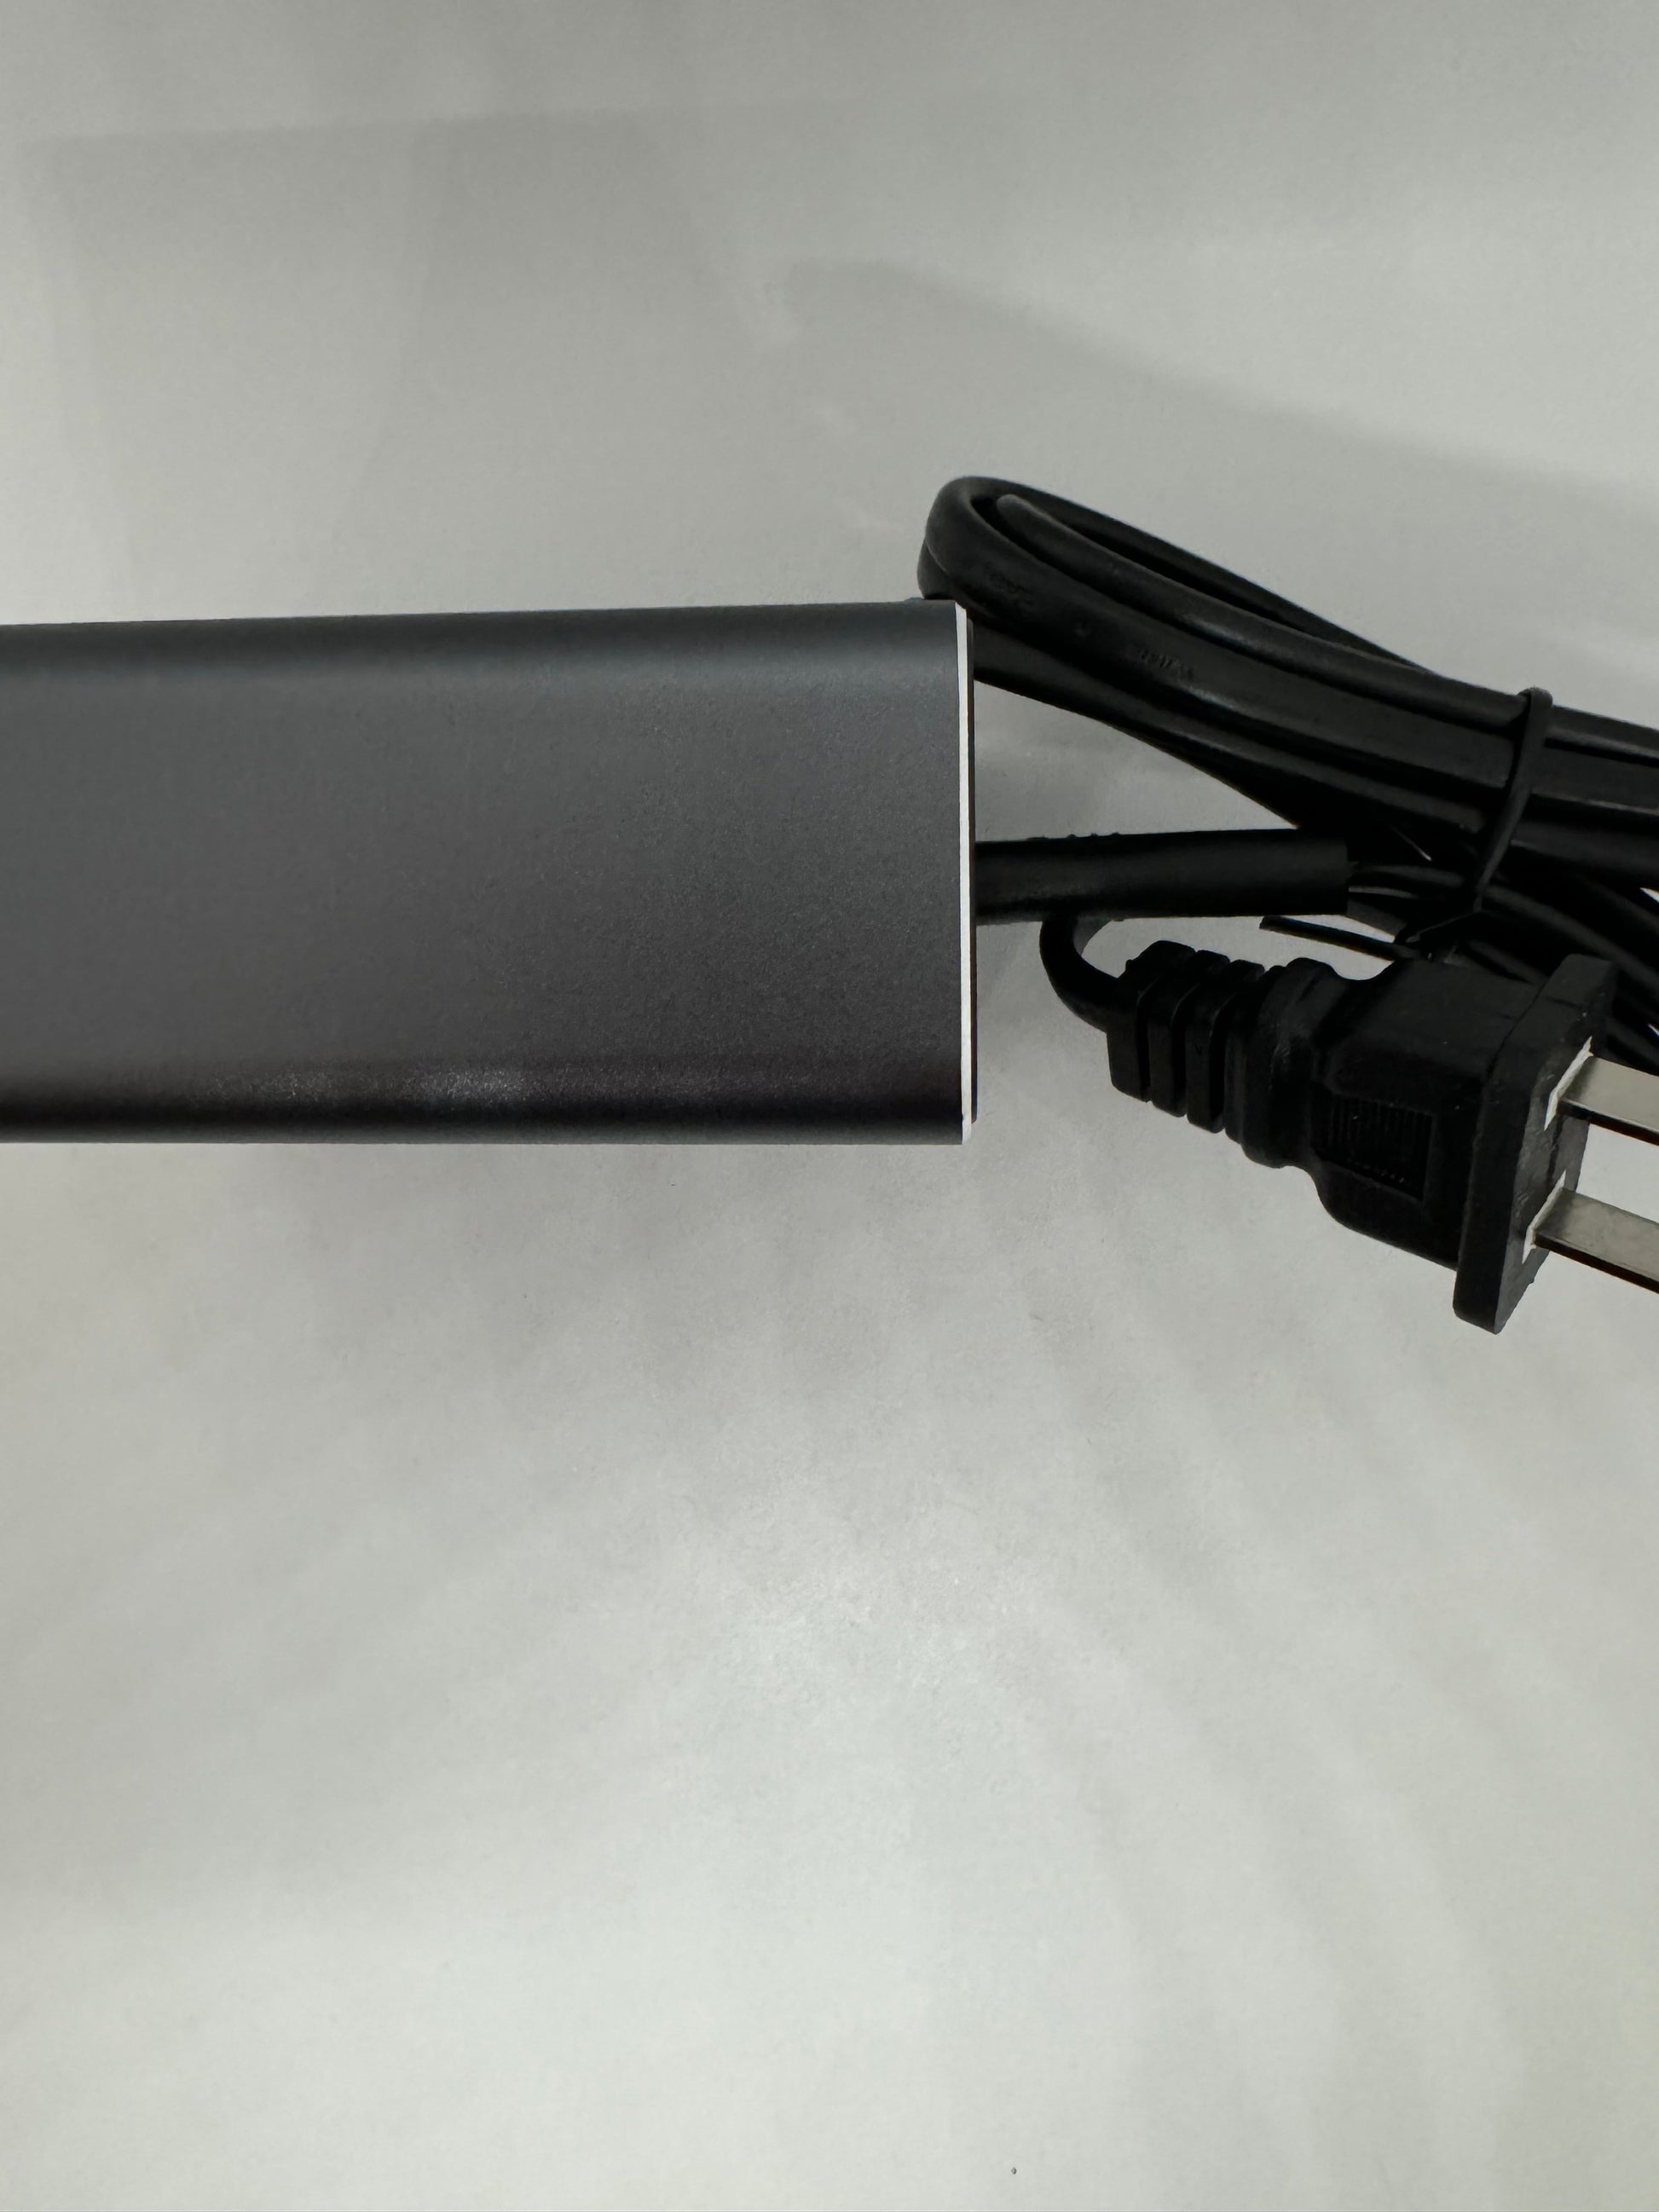 The picture shows a black rectangular object, which appears to be an electronic device, possibly a power bank or an external hard drive. It has a smooth surface and is placed on a white background. There is a black cable with a plug attached to it, coiled up next to the rectangular object. The cable seems to be a power cord or a connector cable. The overall setting is simple and the focus is on the rectangular object and the cable.